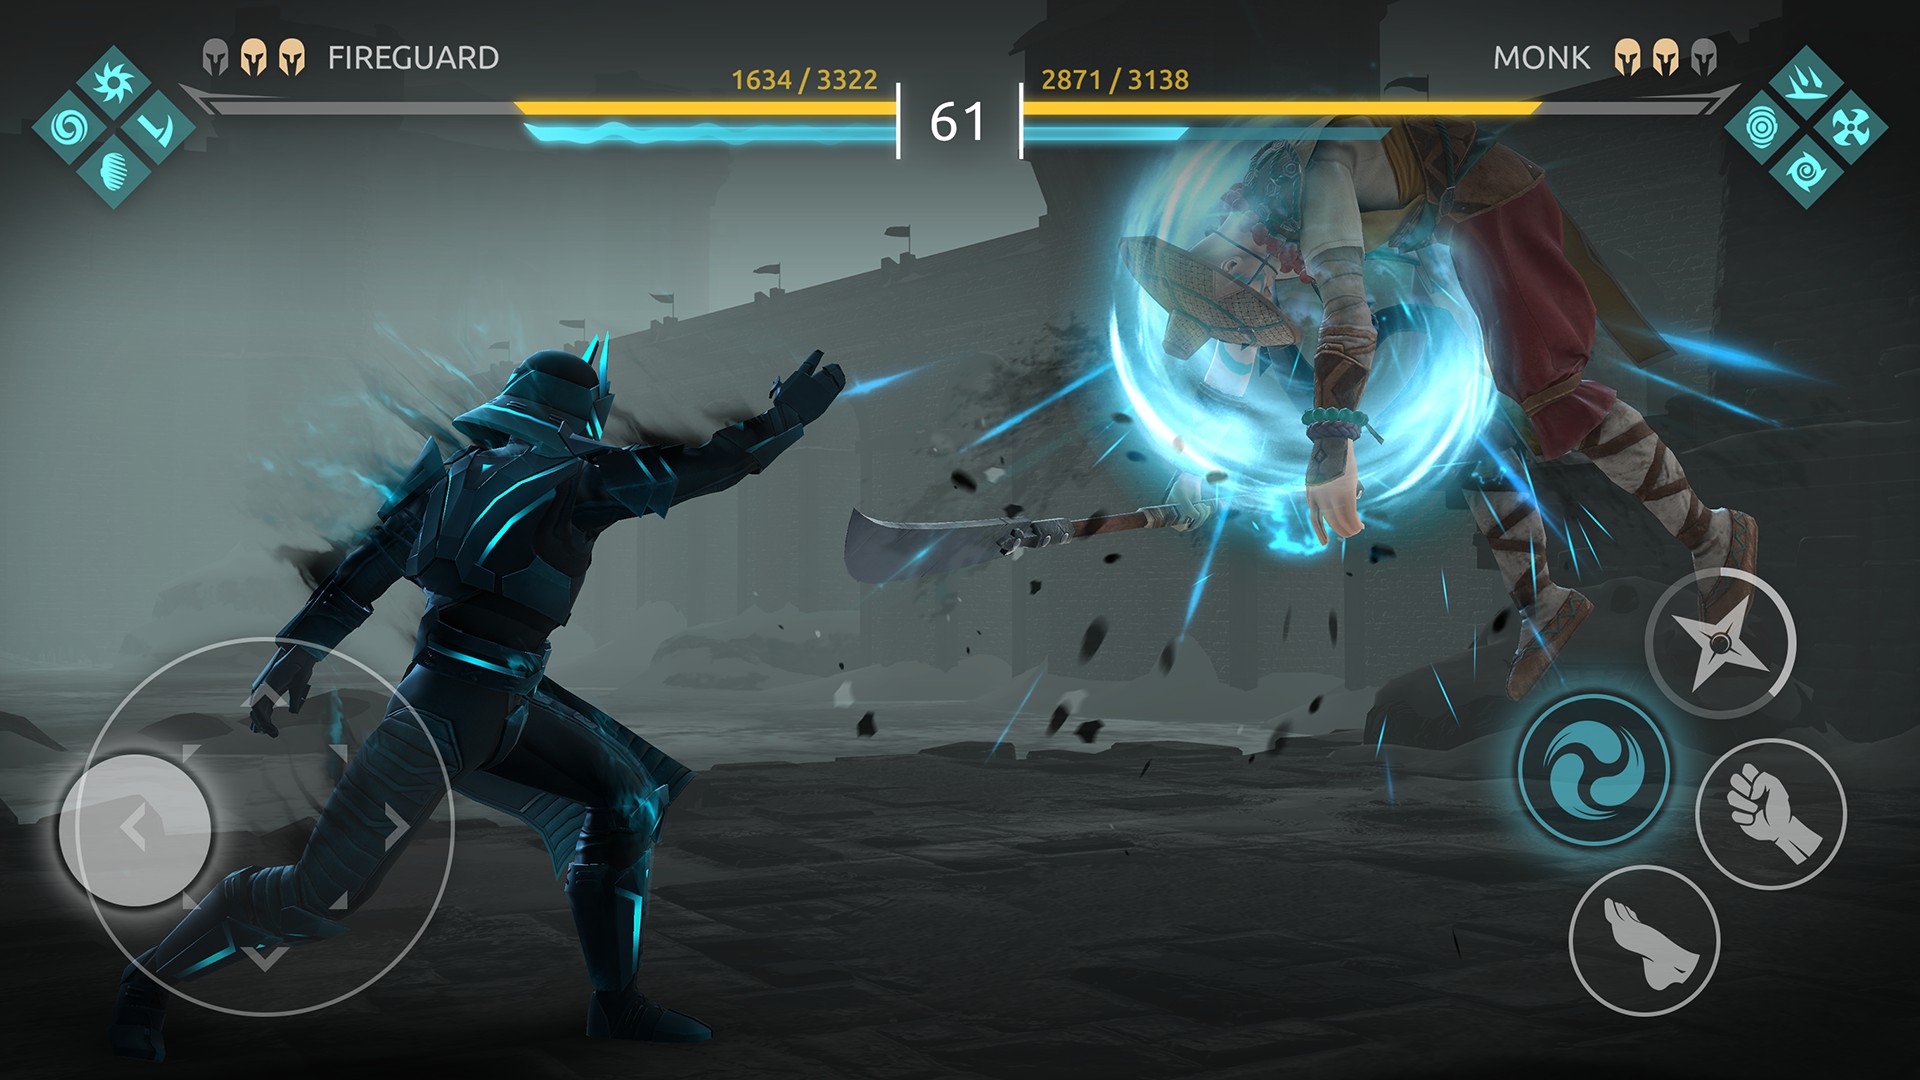 Shadow Fight Arena - The Next Evolution of Fighting Games - Free on iOS and  Android